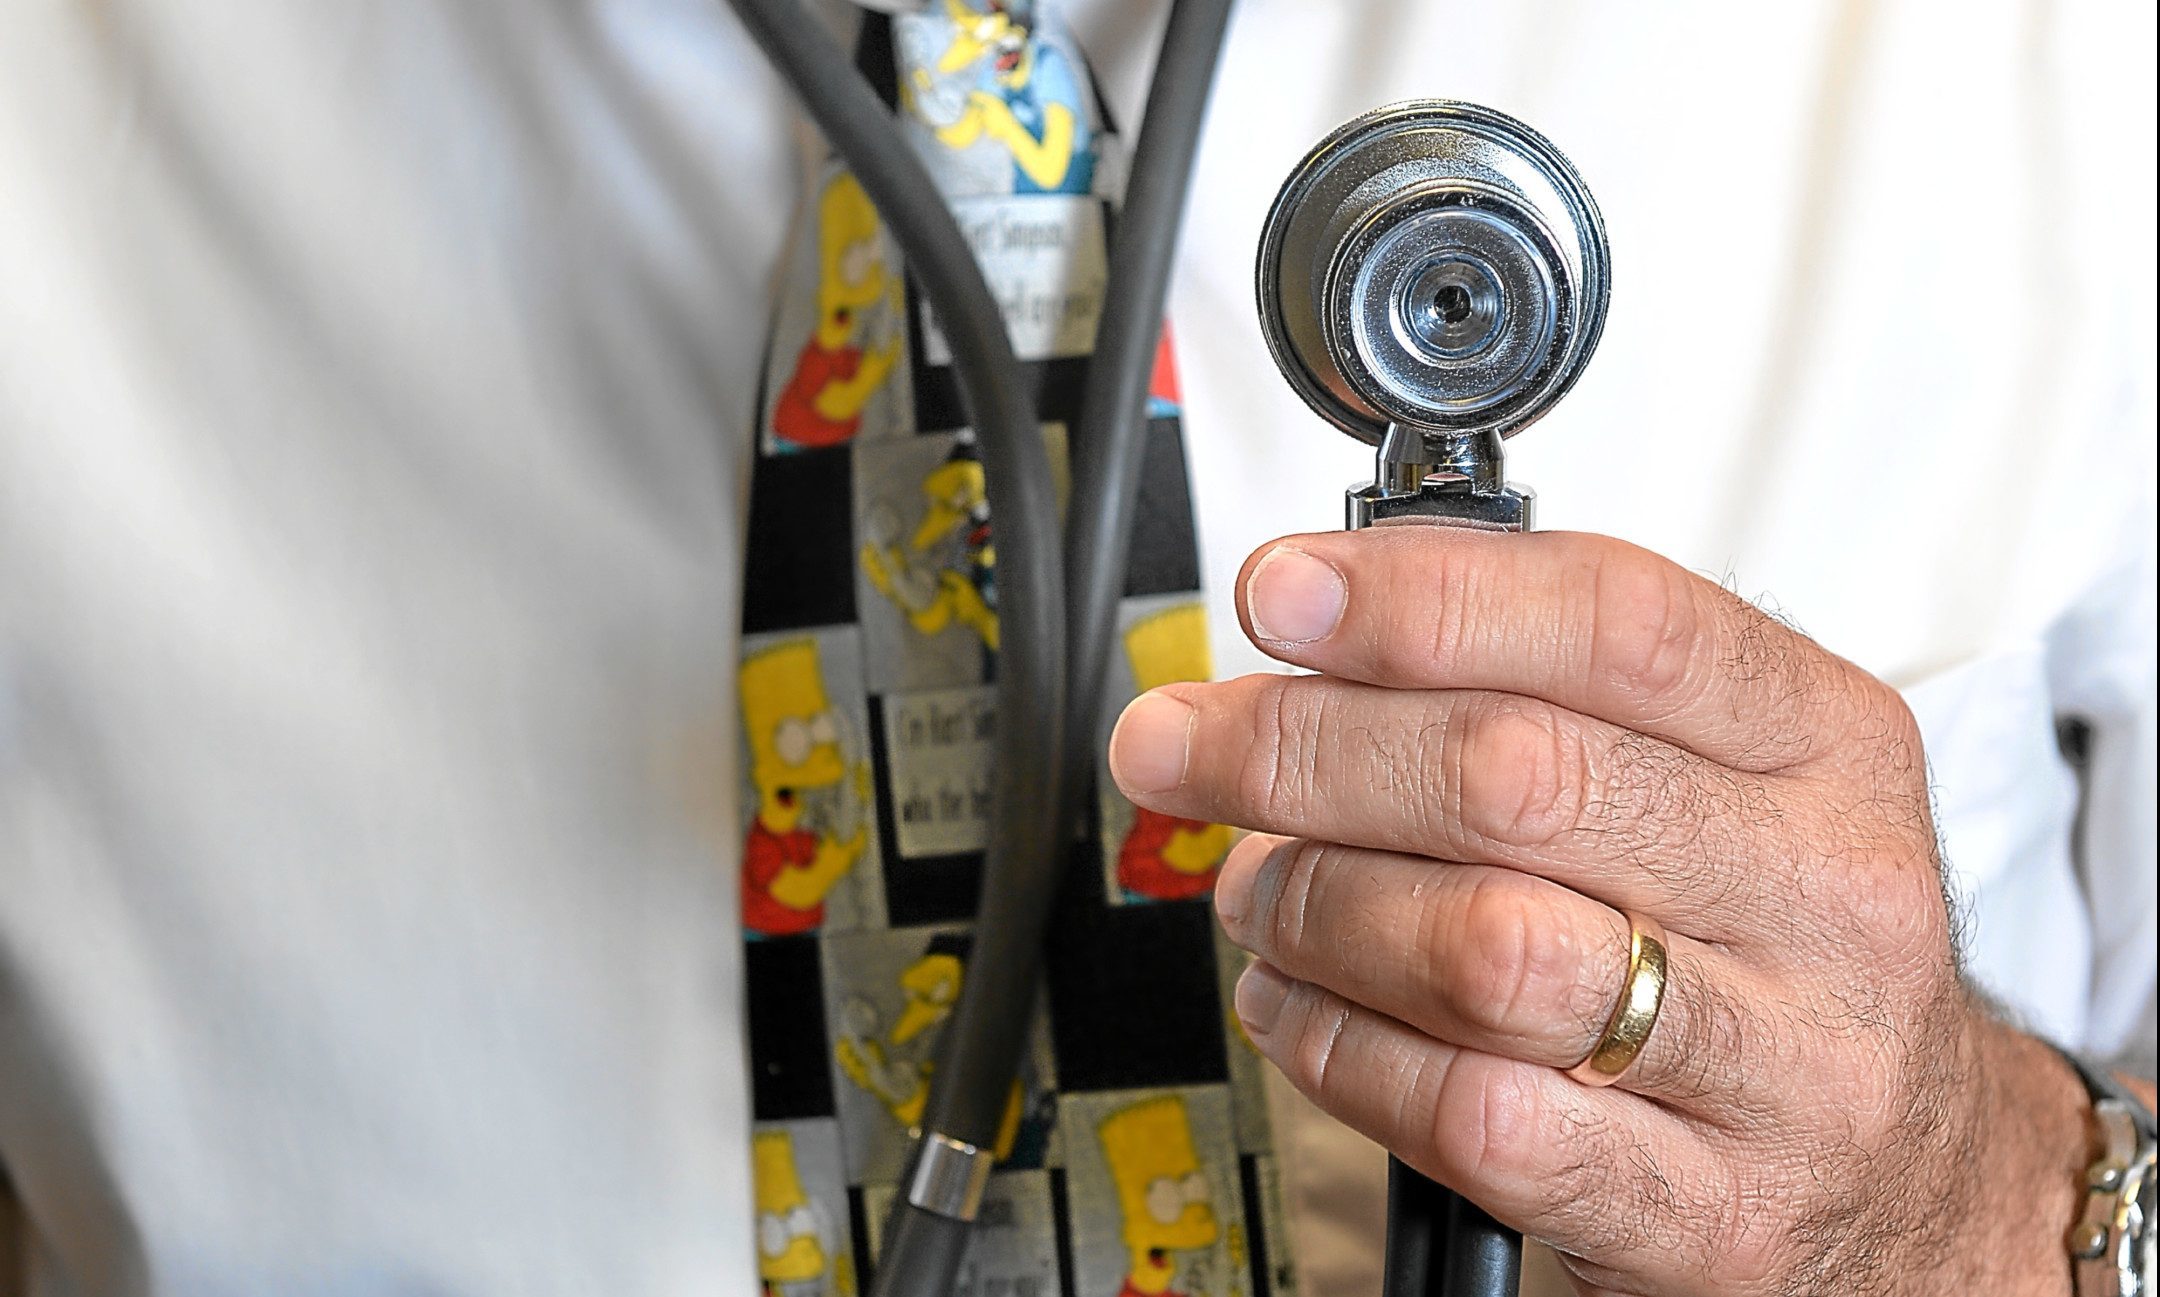 More than 800 GPs are needed in Scotland just to return to staffing to its 2009 levels, says the Royal College of GPs.